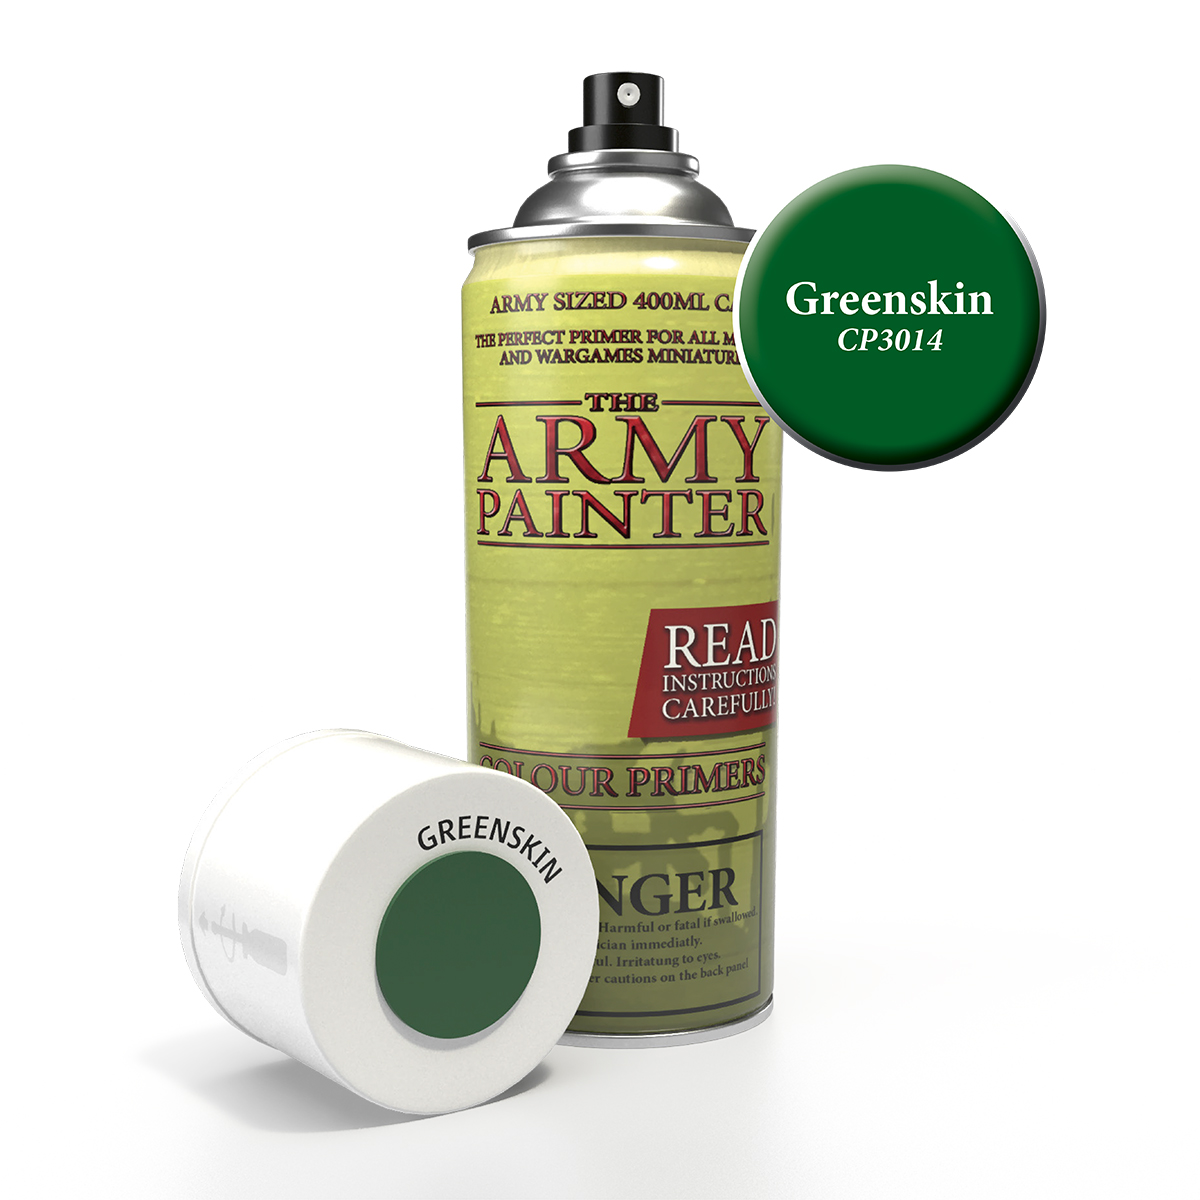 ArmyPainter Colorspray Greenskin